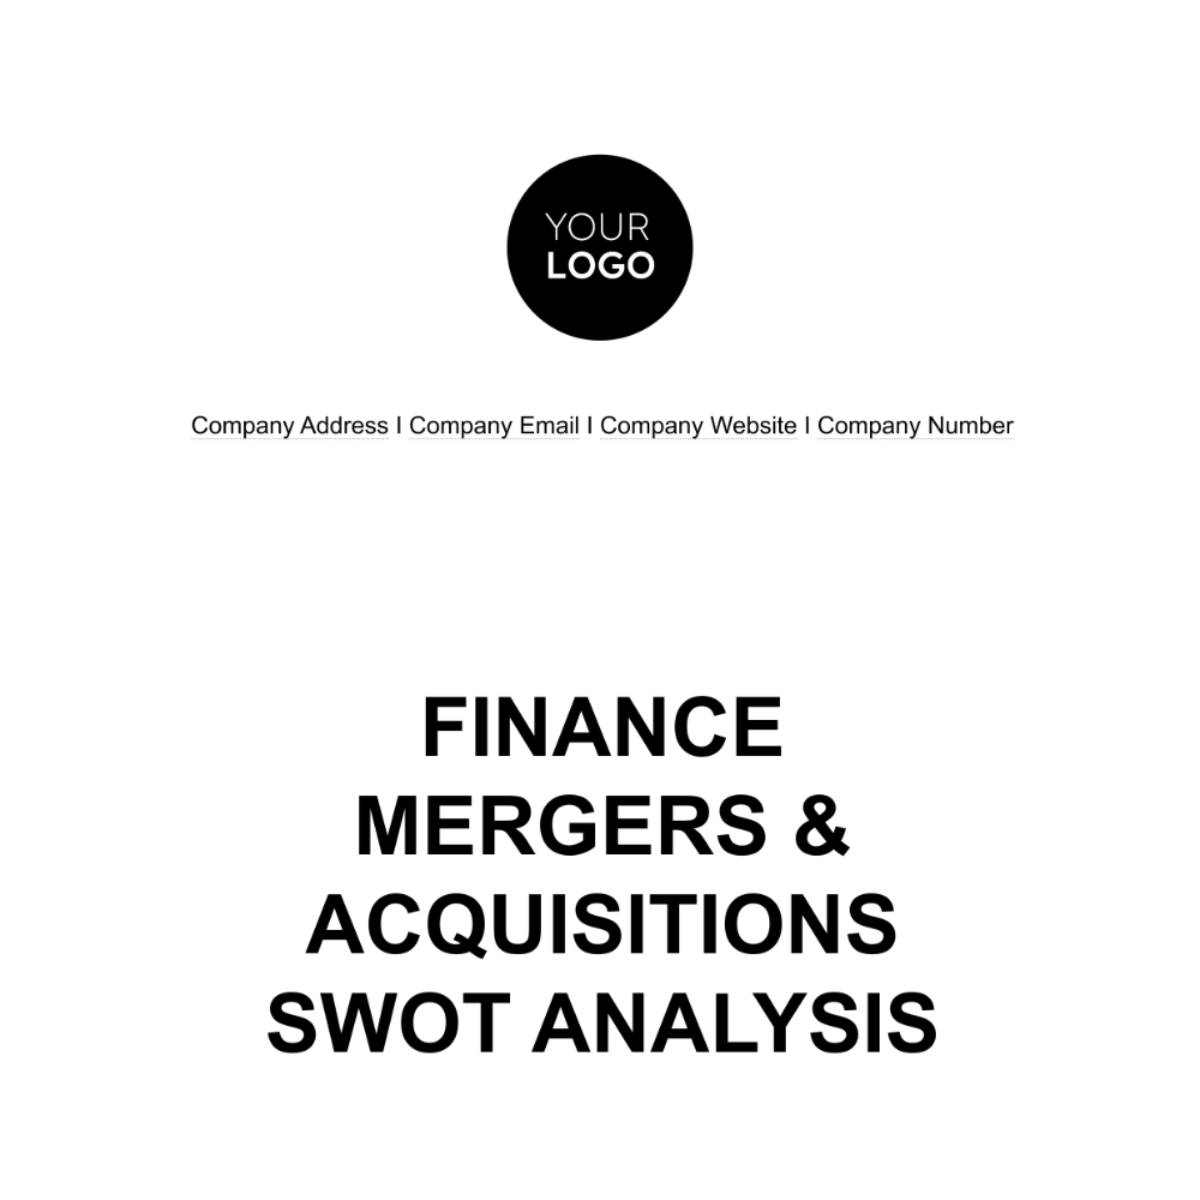 Finance Mergers & Acquisitions SWOT Analysis Template